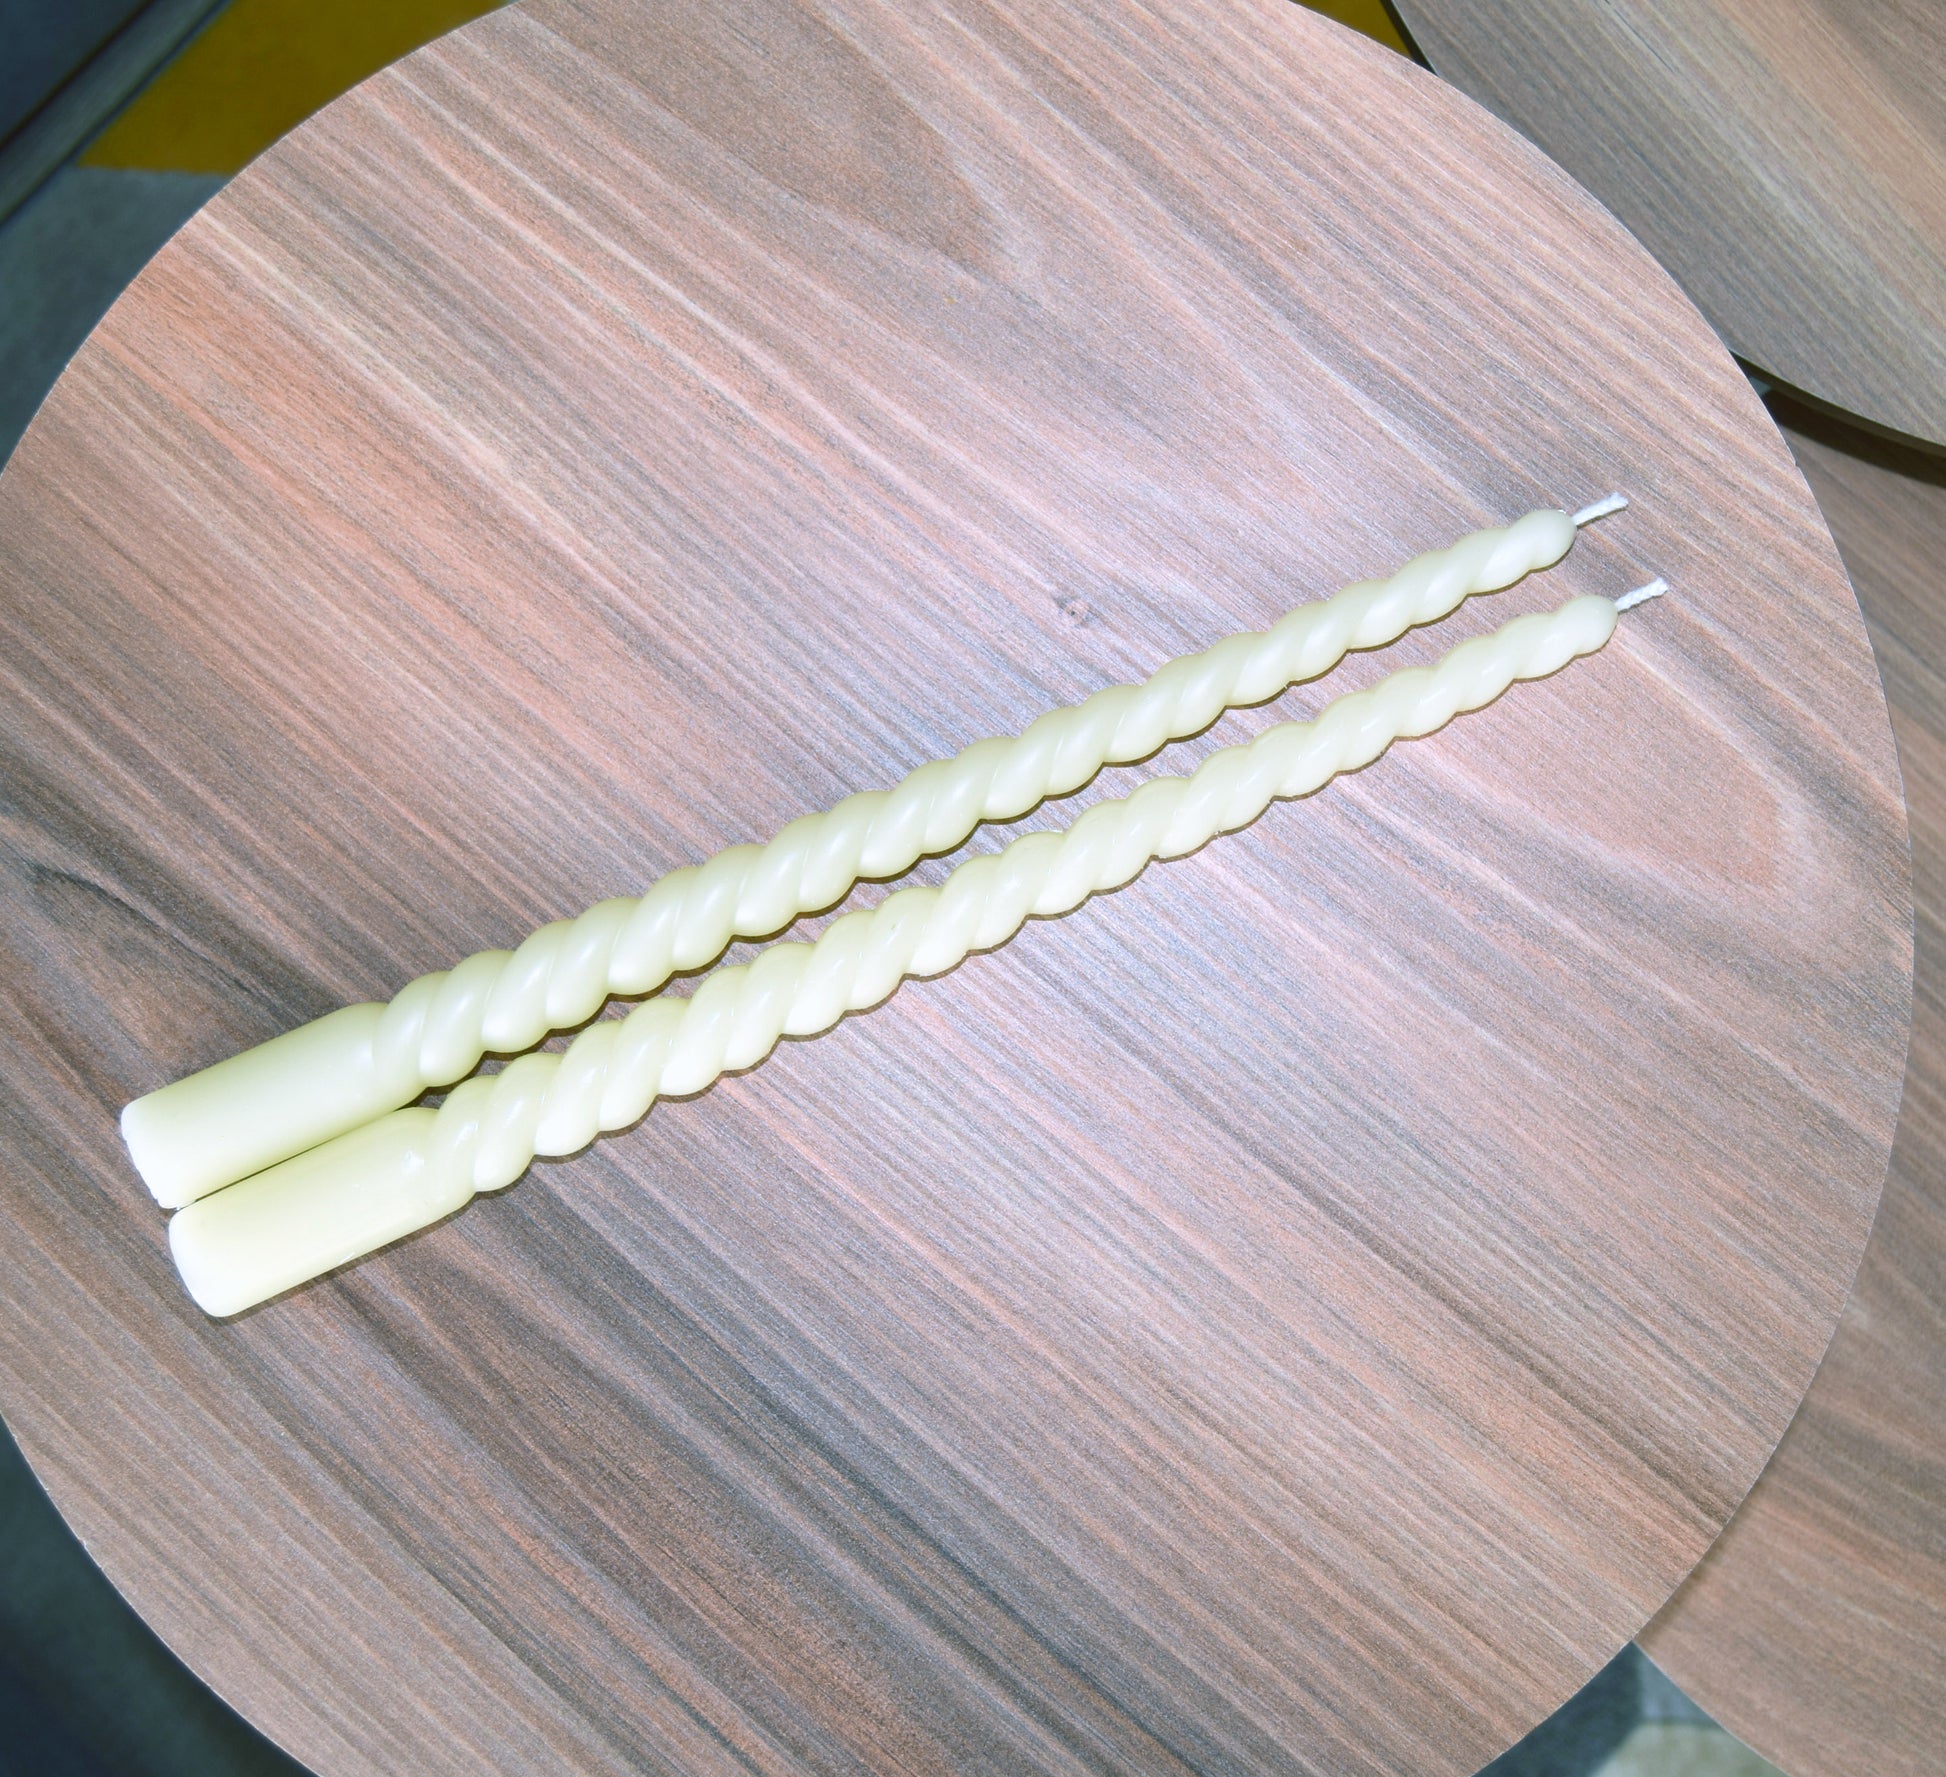 This is a picture of Homemade Dripless Beeswax Spiral Taper Candles